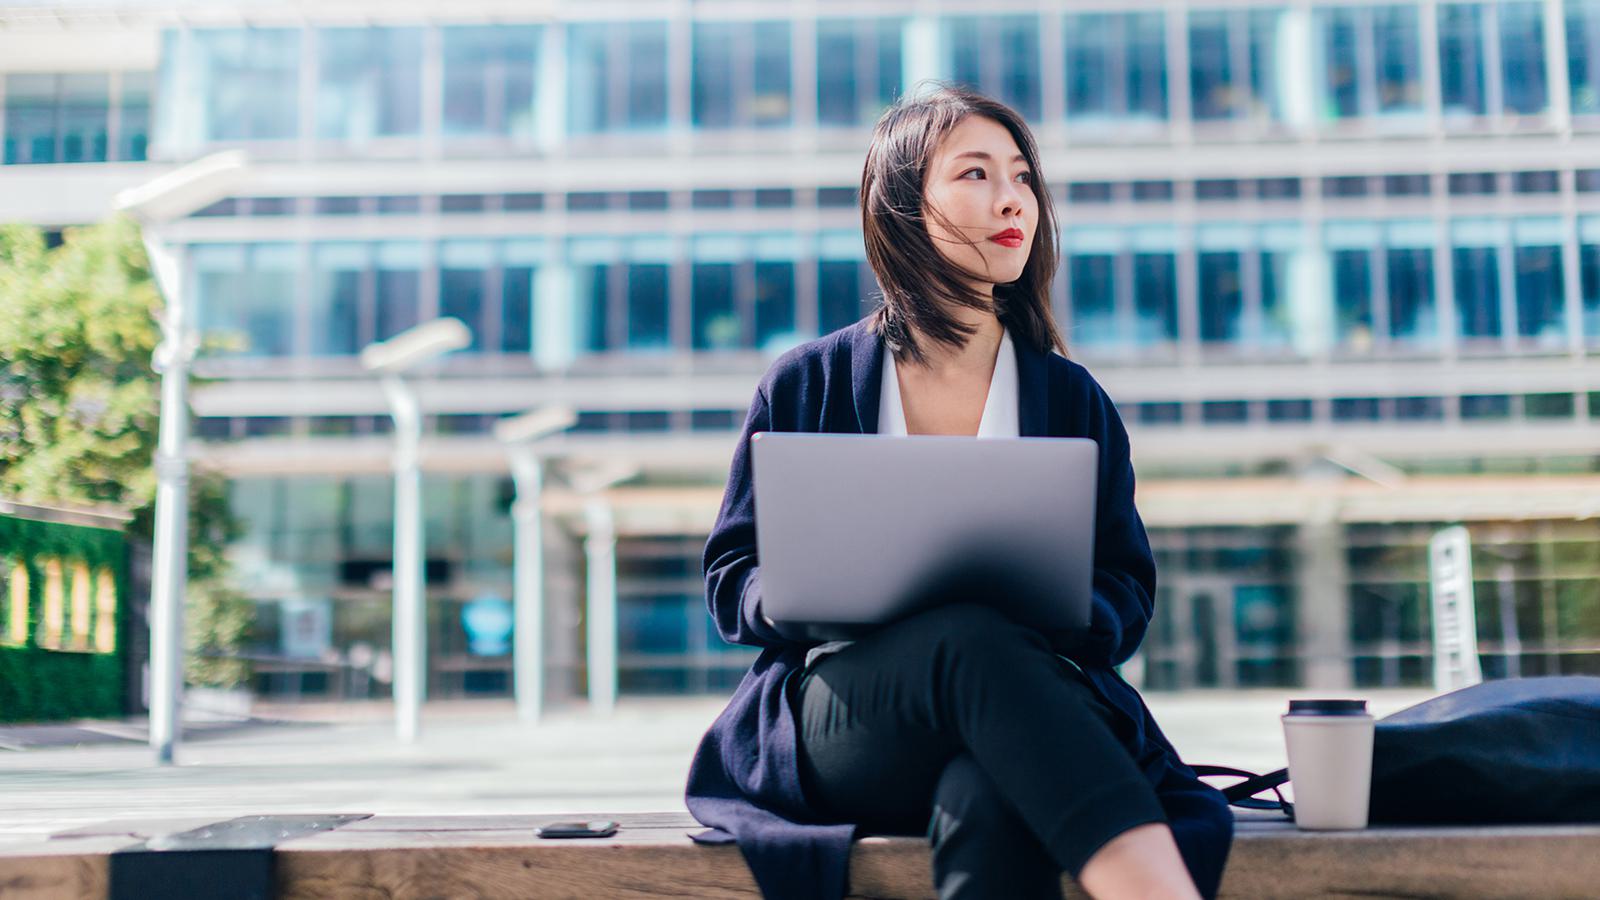 Woman on computer outside office building